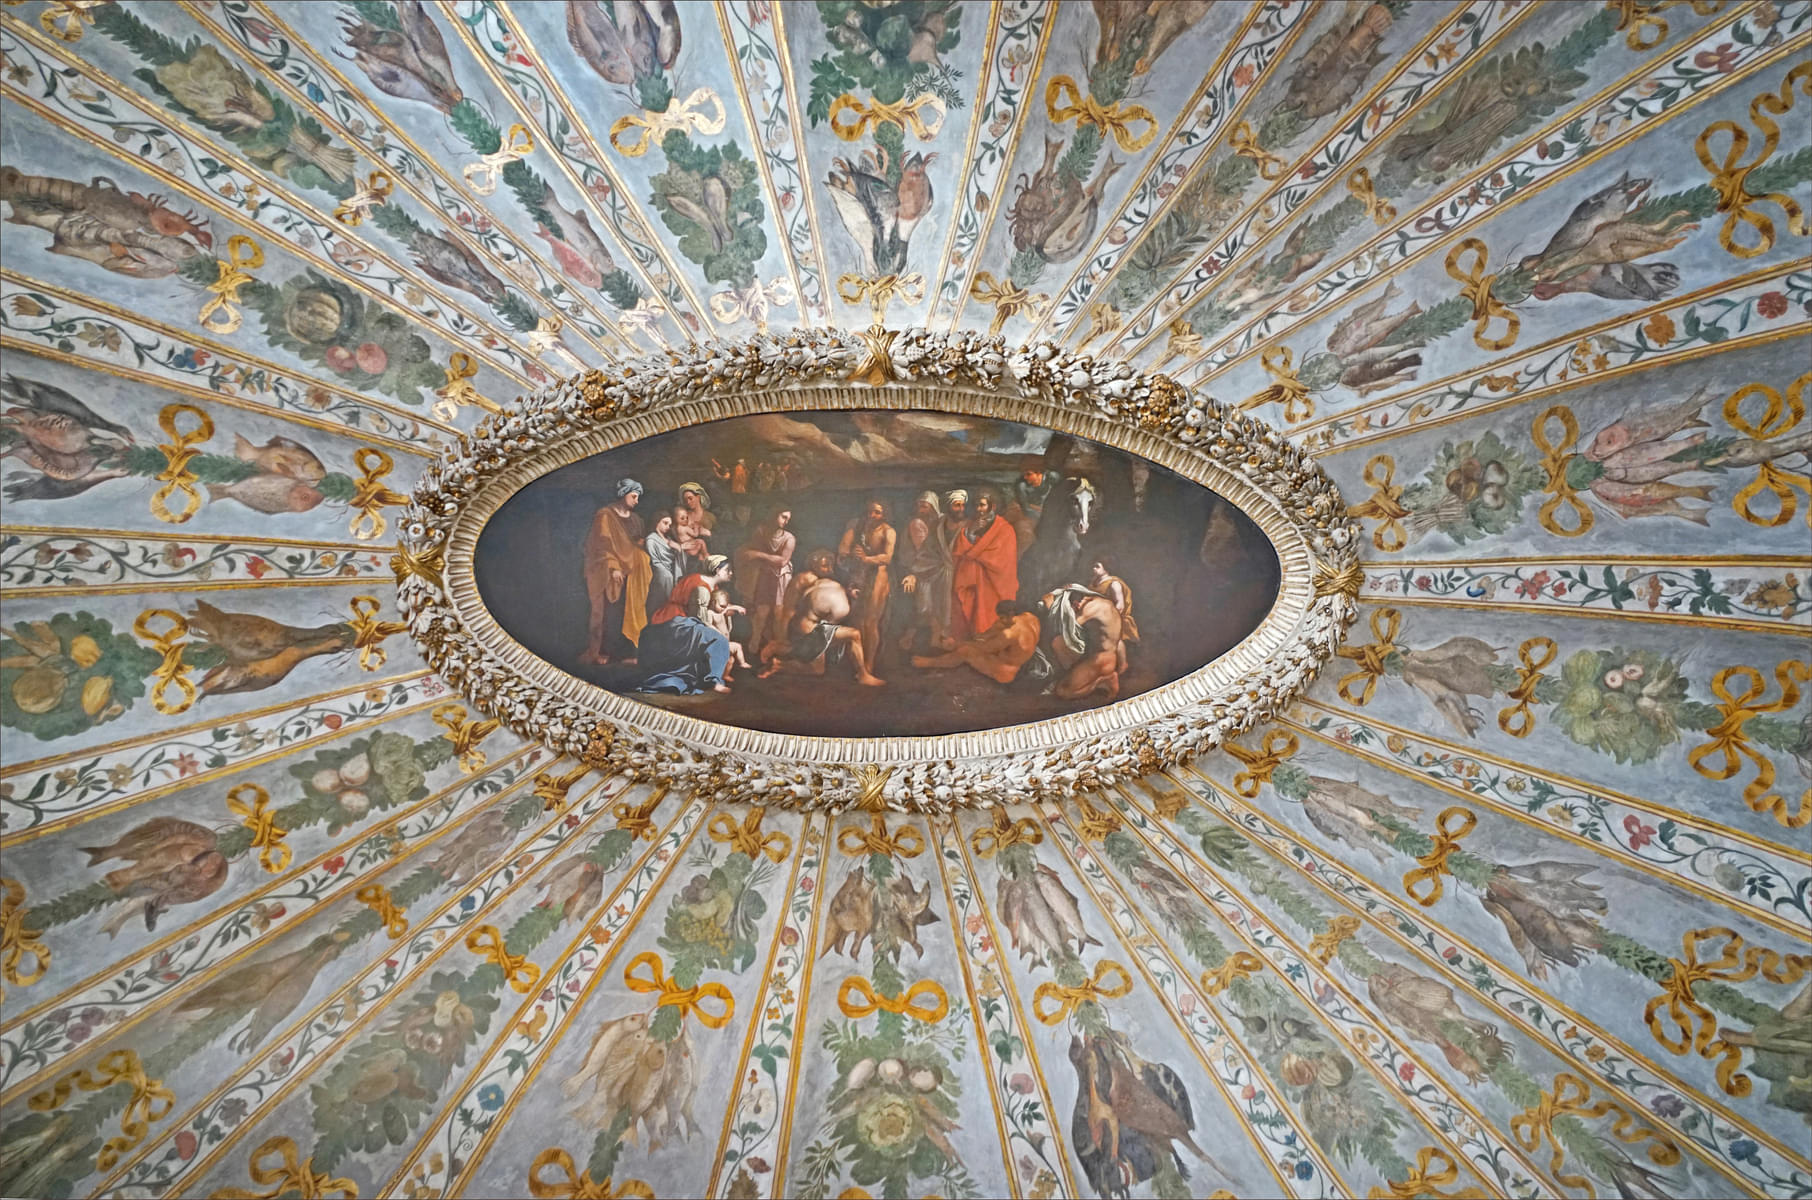 Discover the storyline across the palace's fresco depiction